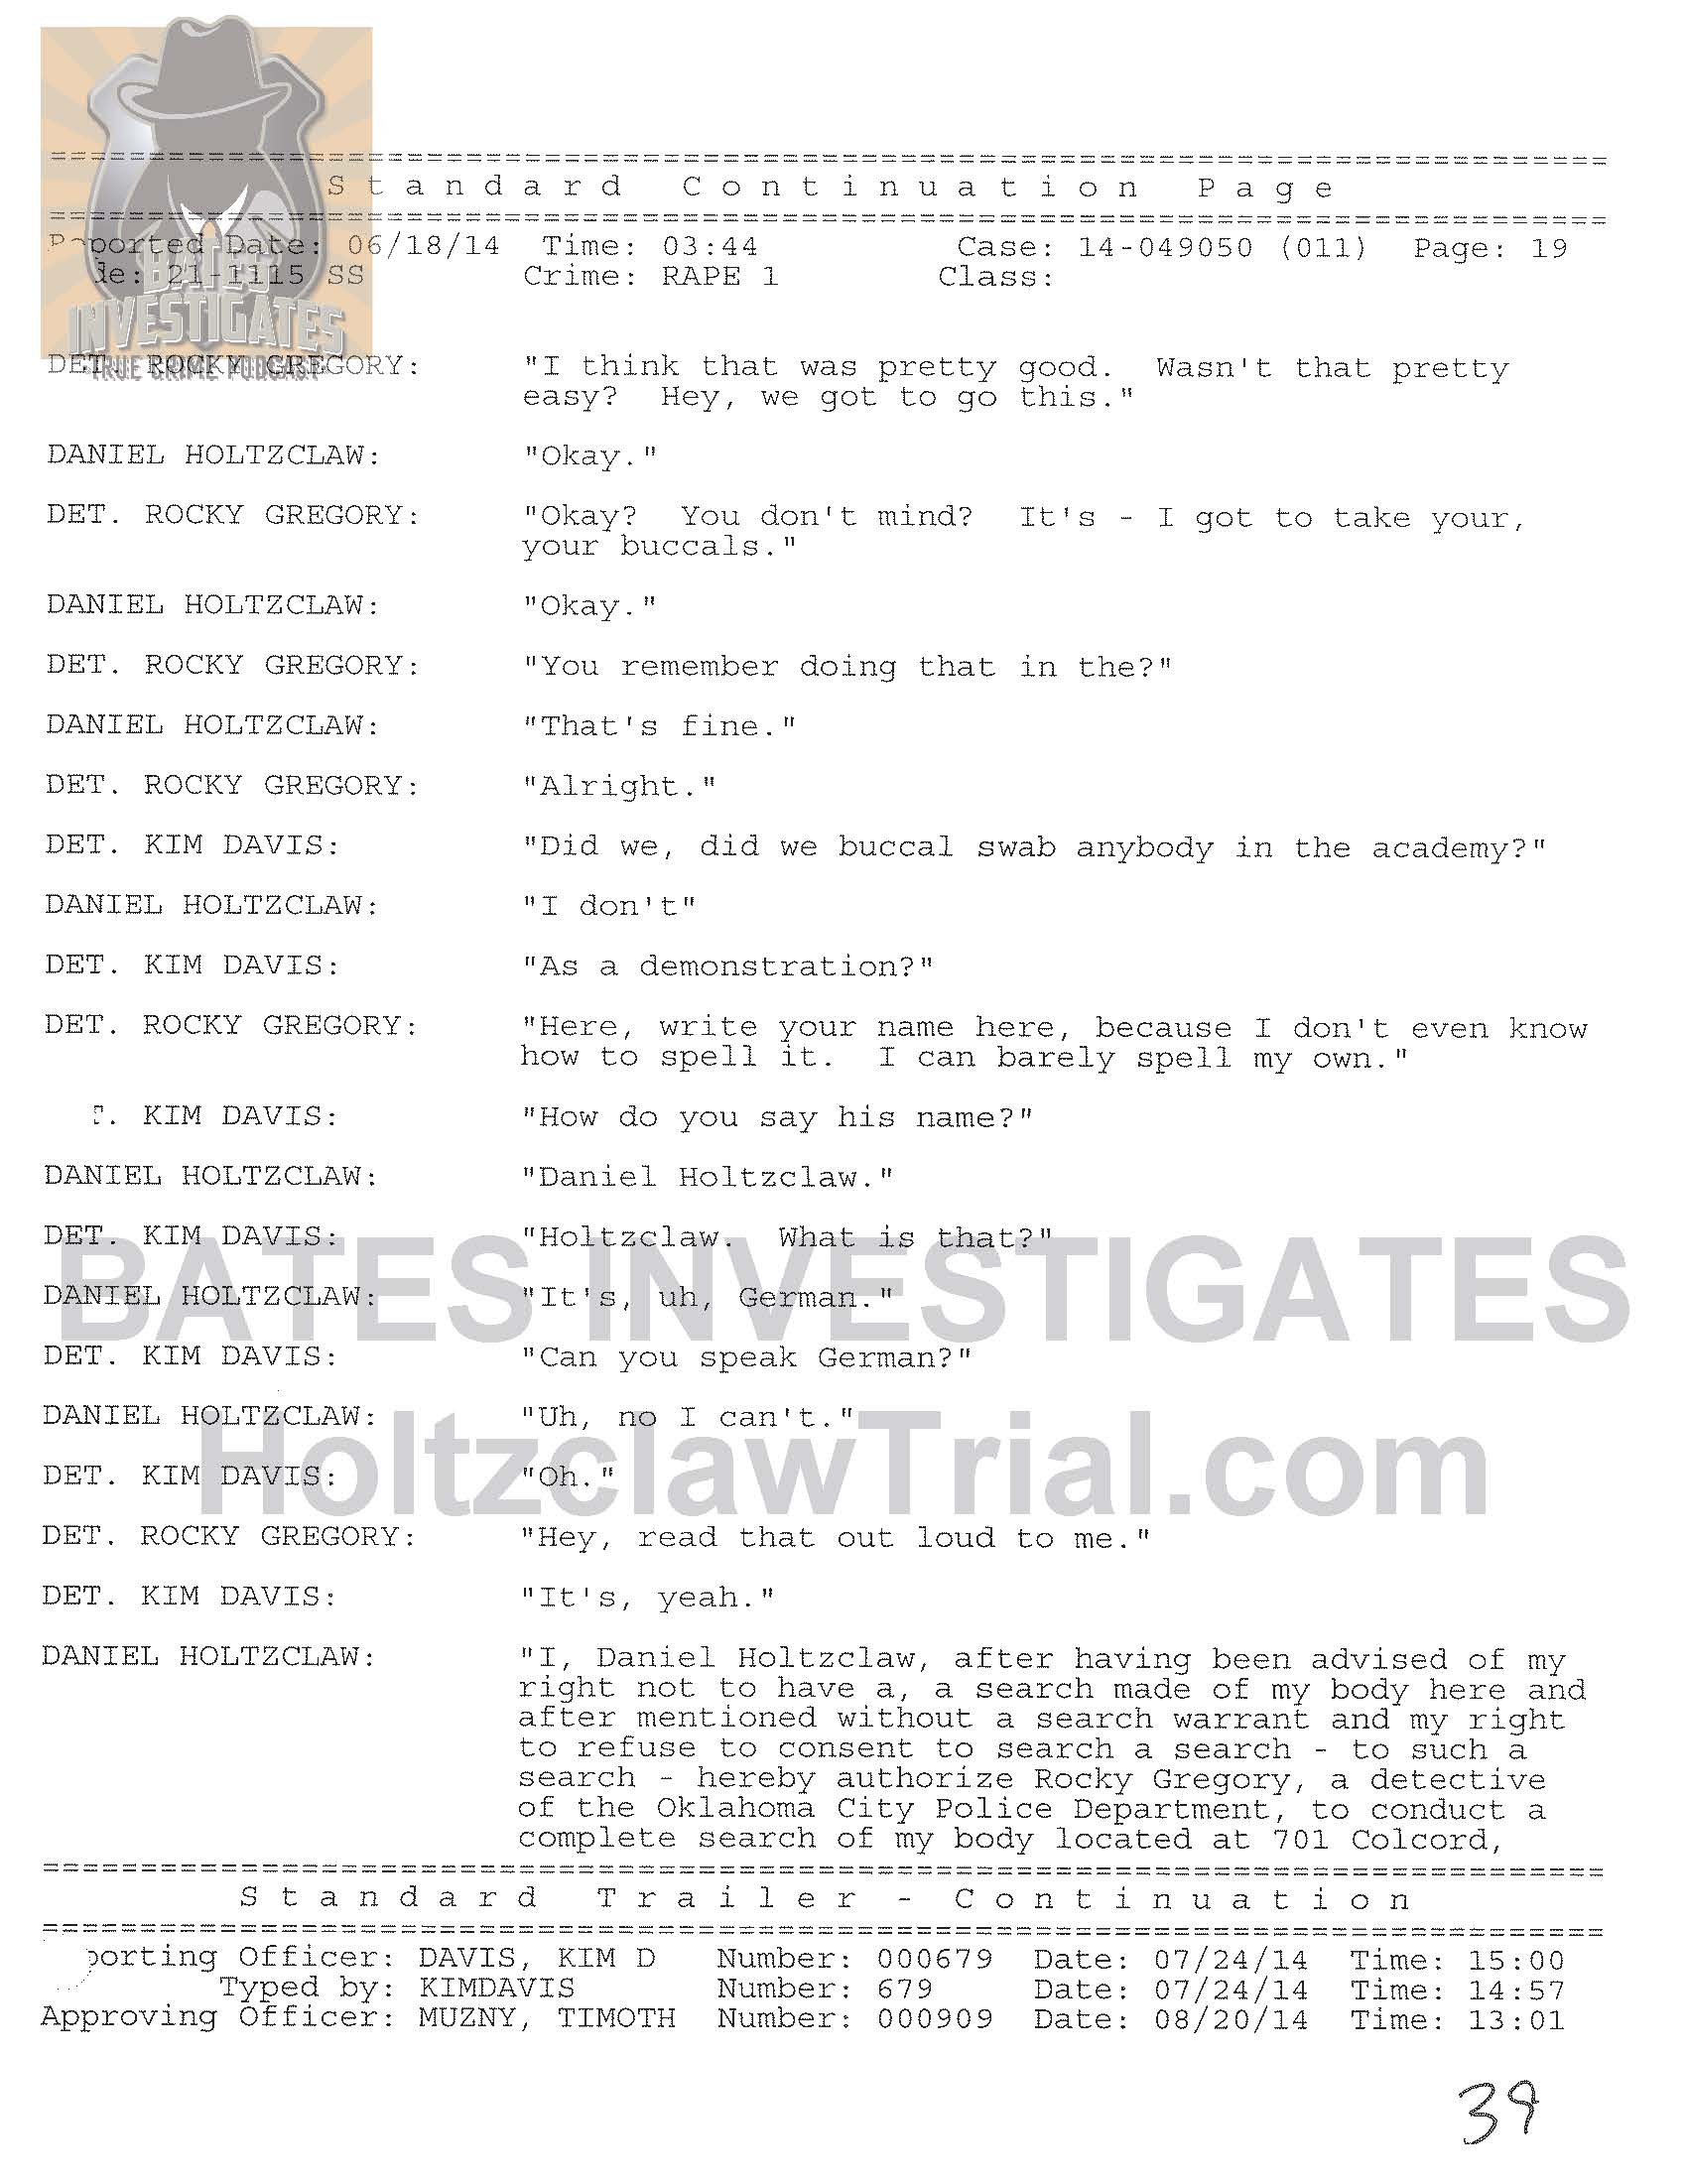 Holtzclaw Interrogation Transcript - Ep02 Redacted_Page_19.jpg